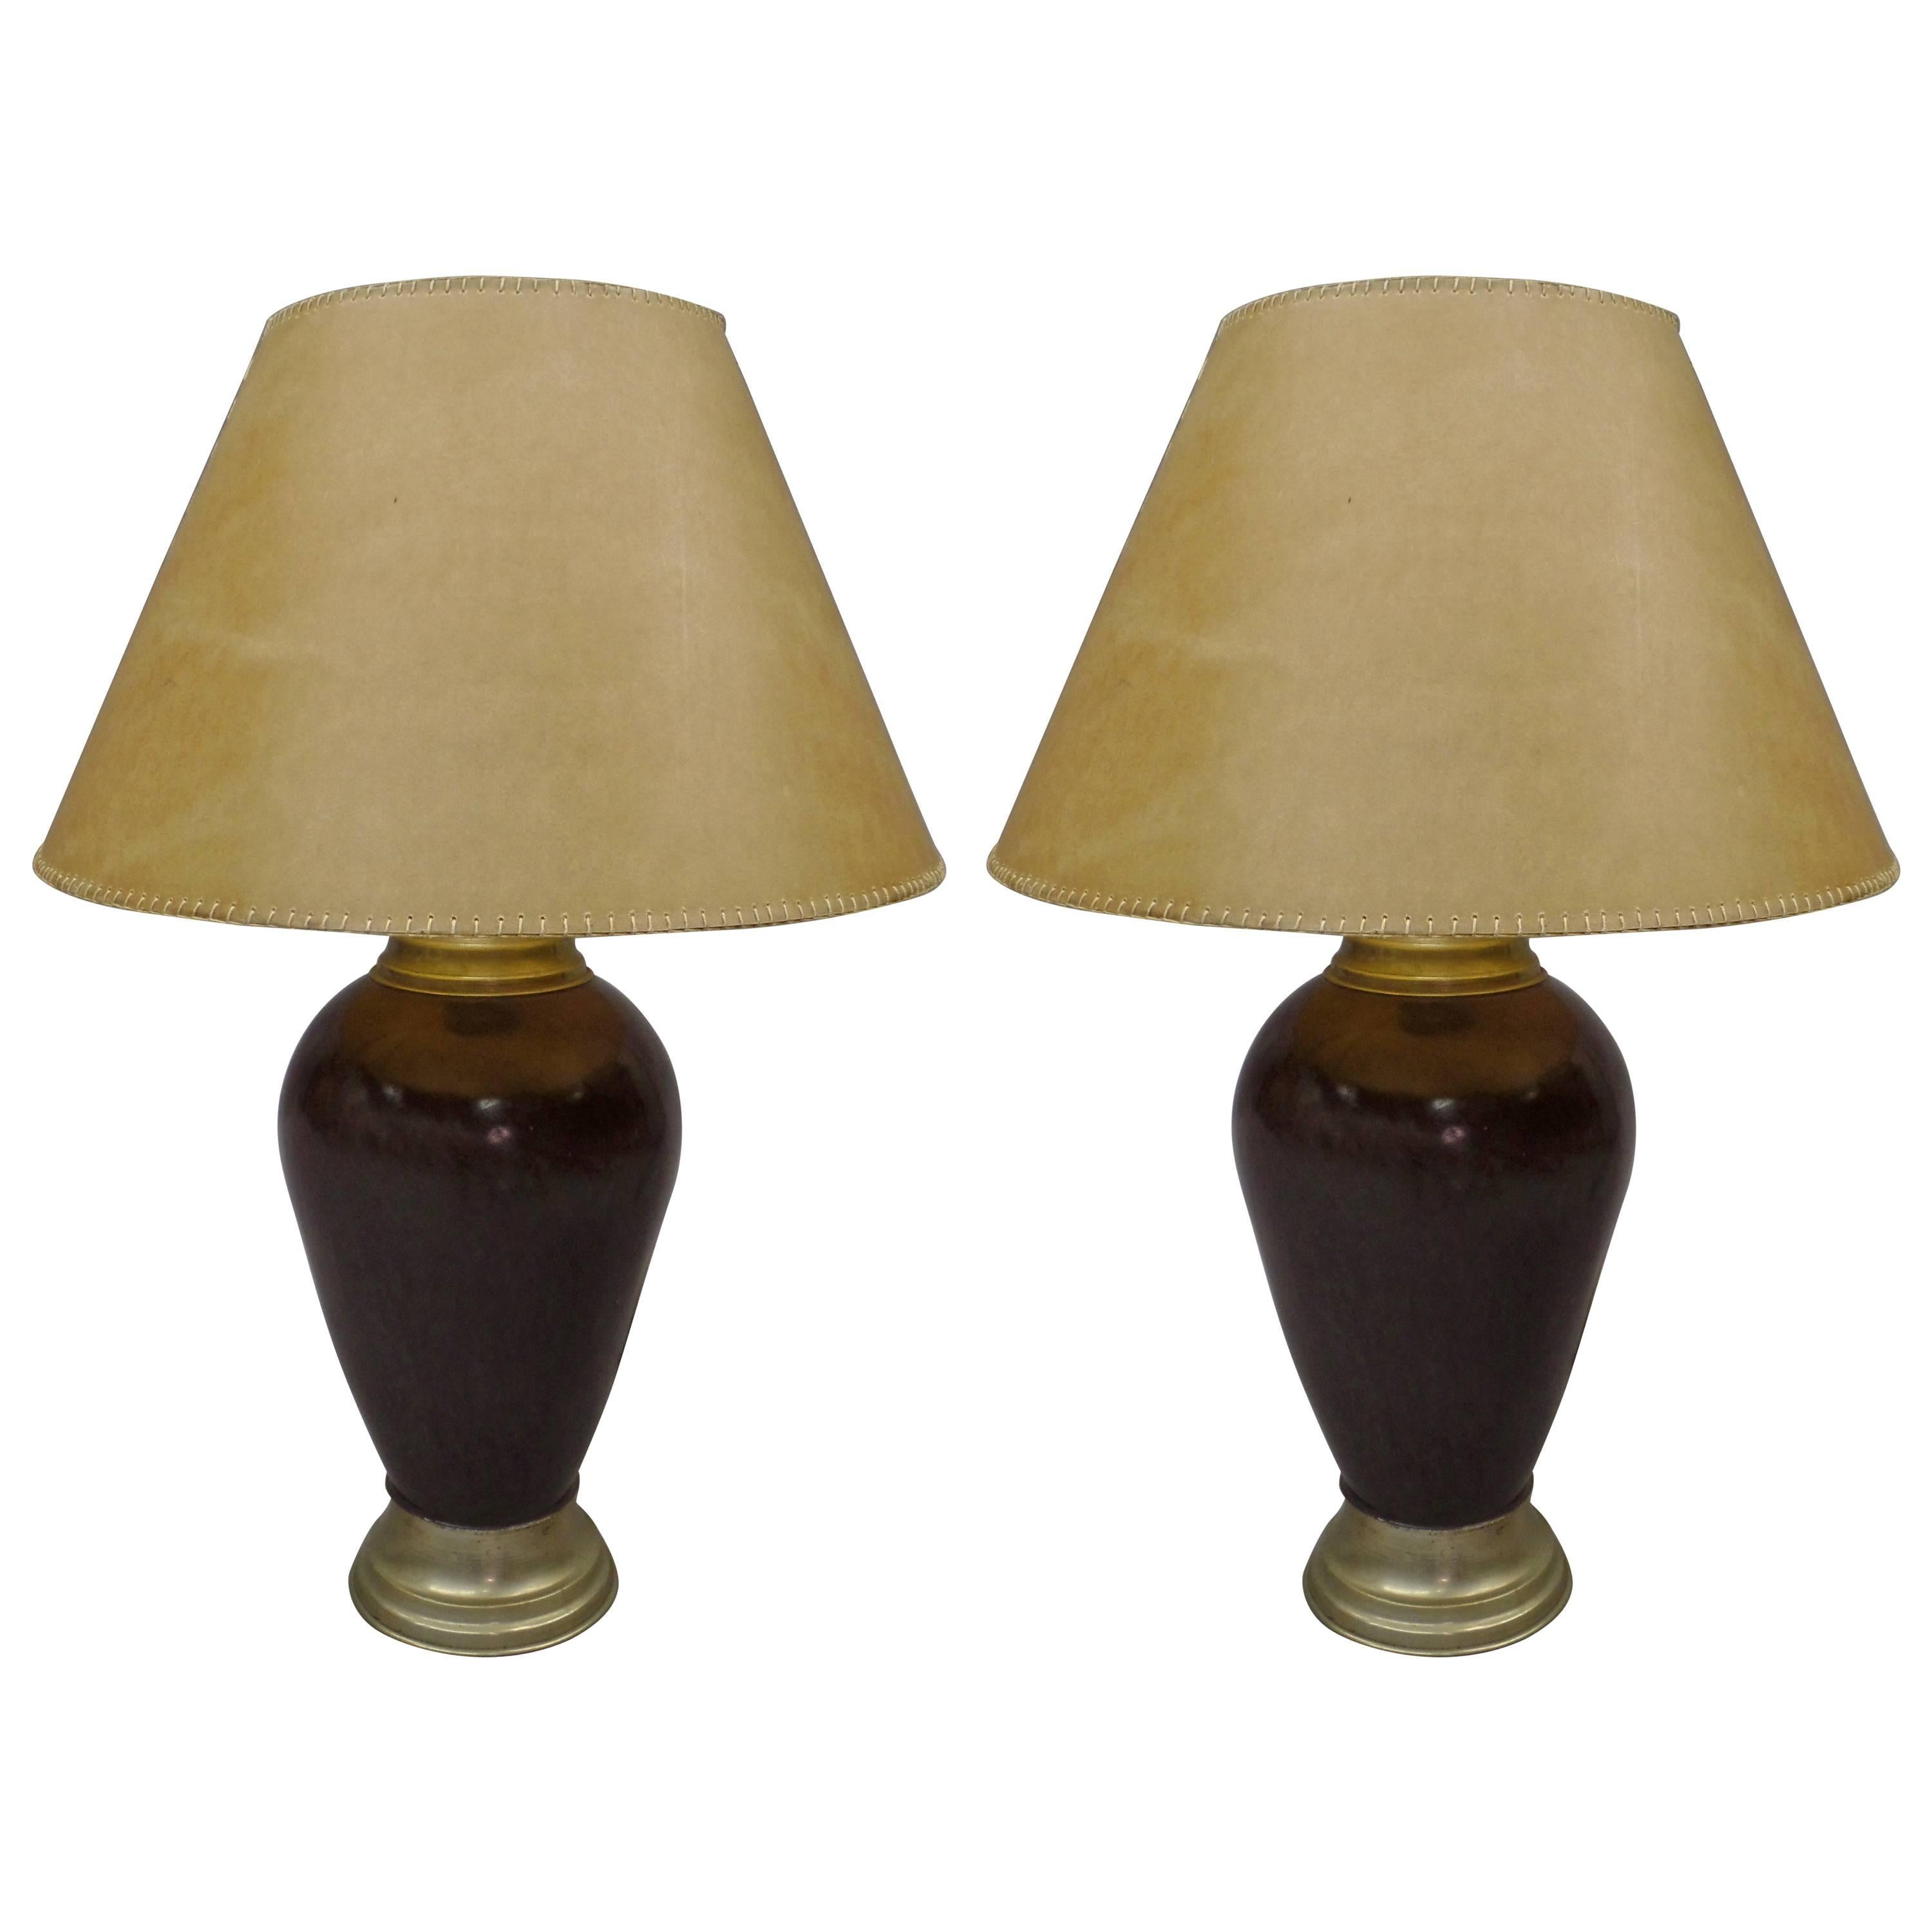 French Mid-Century Modern Mauve Enameled Steel Table Lamps For Sale